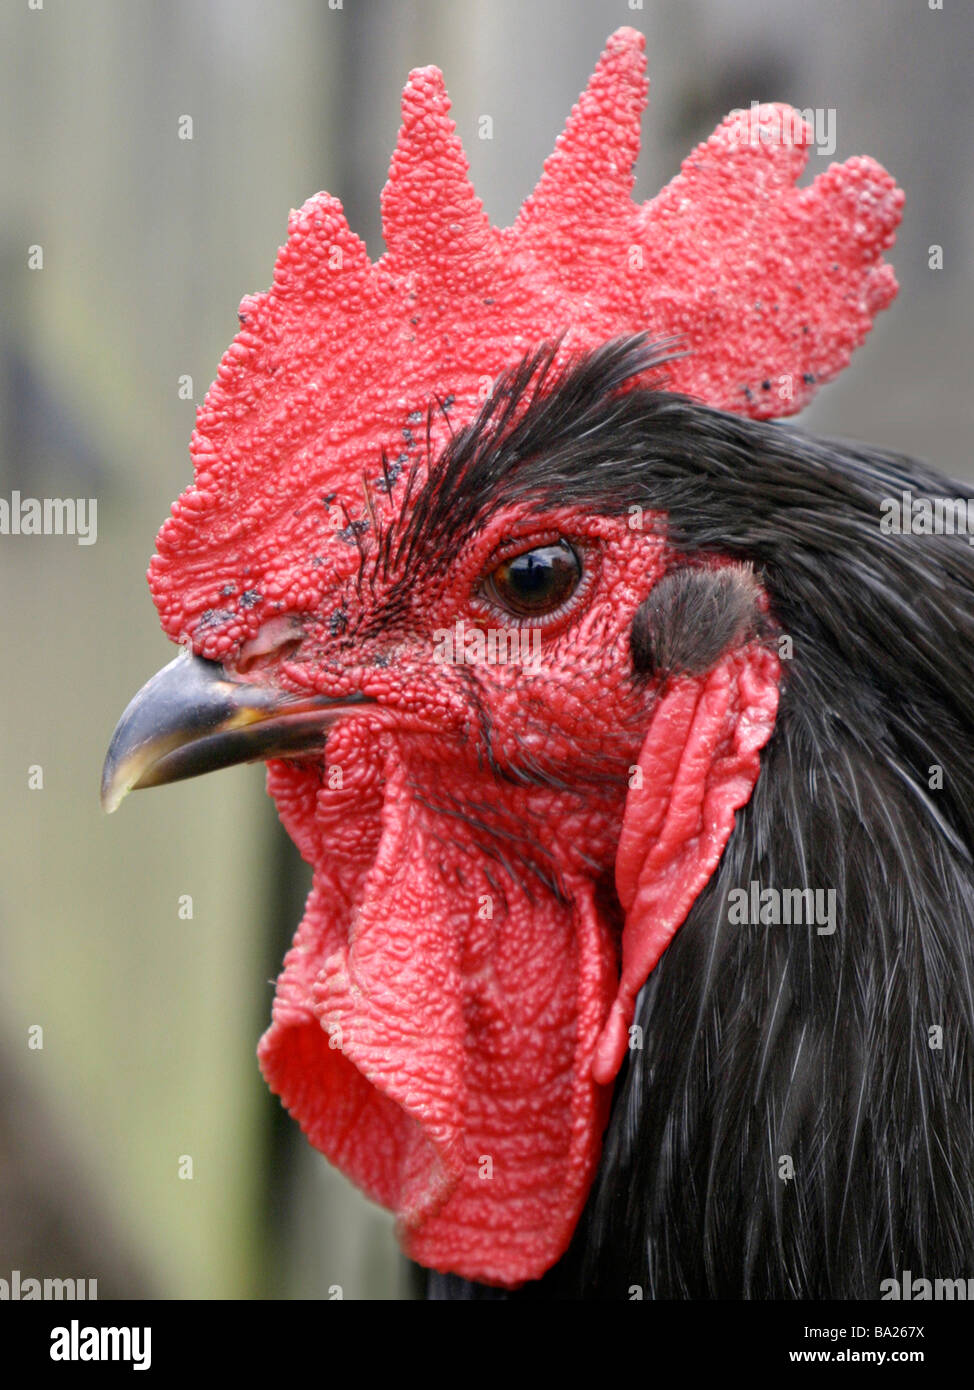 A head of a black rooster Stock Photo